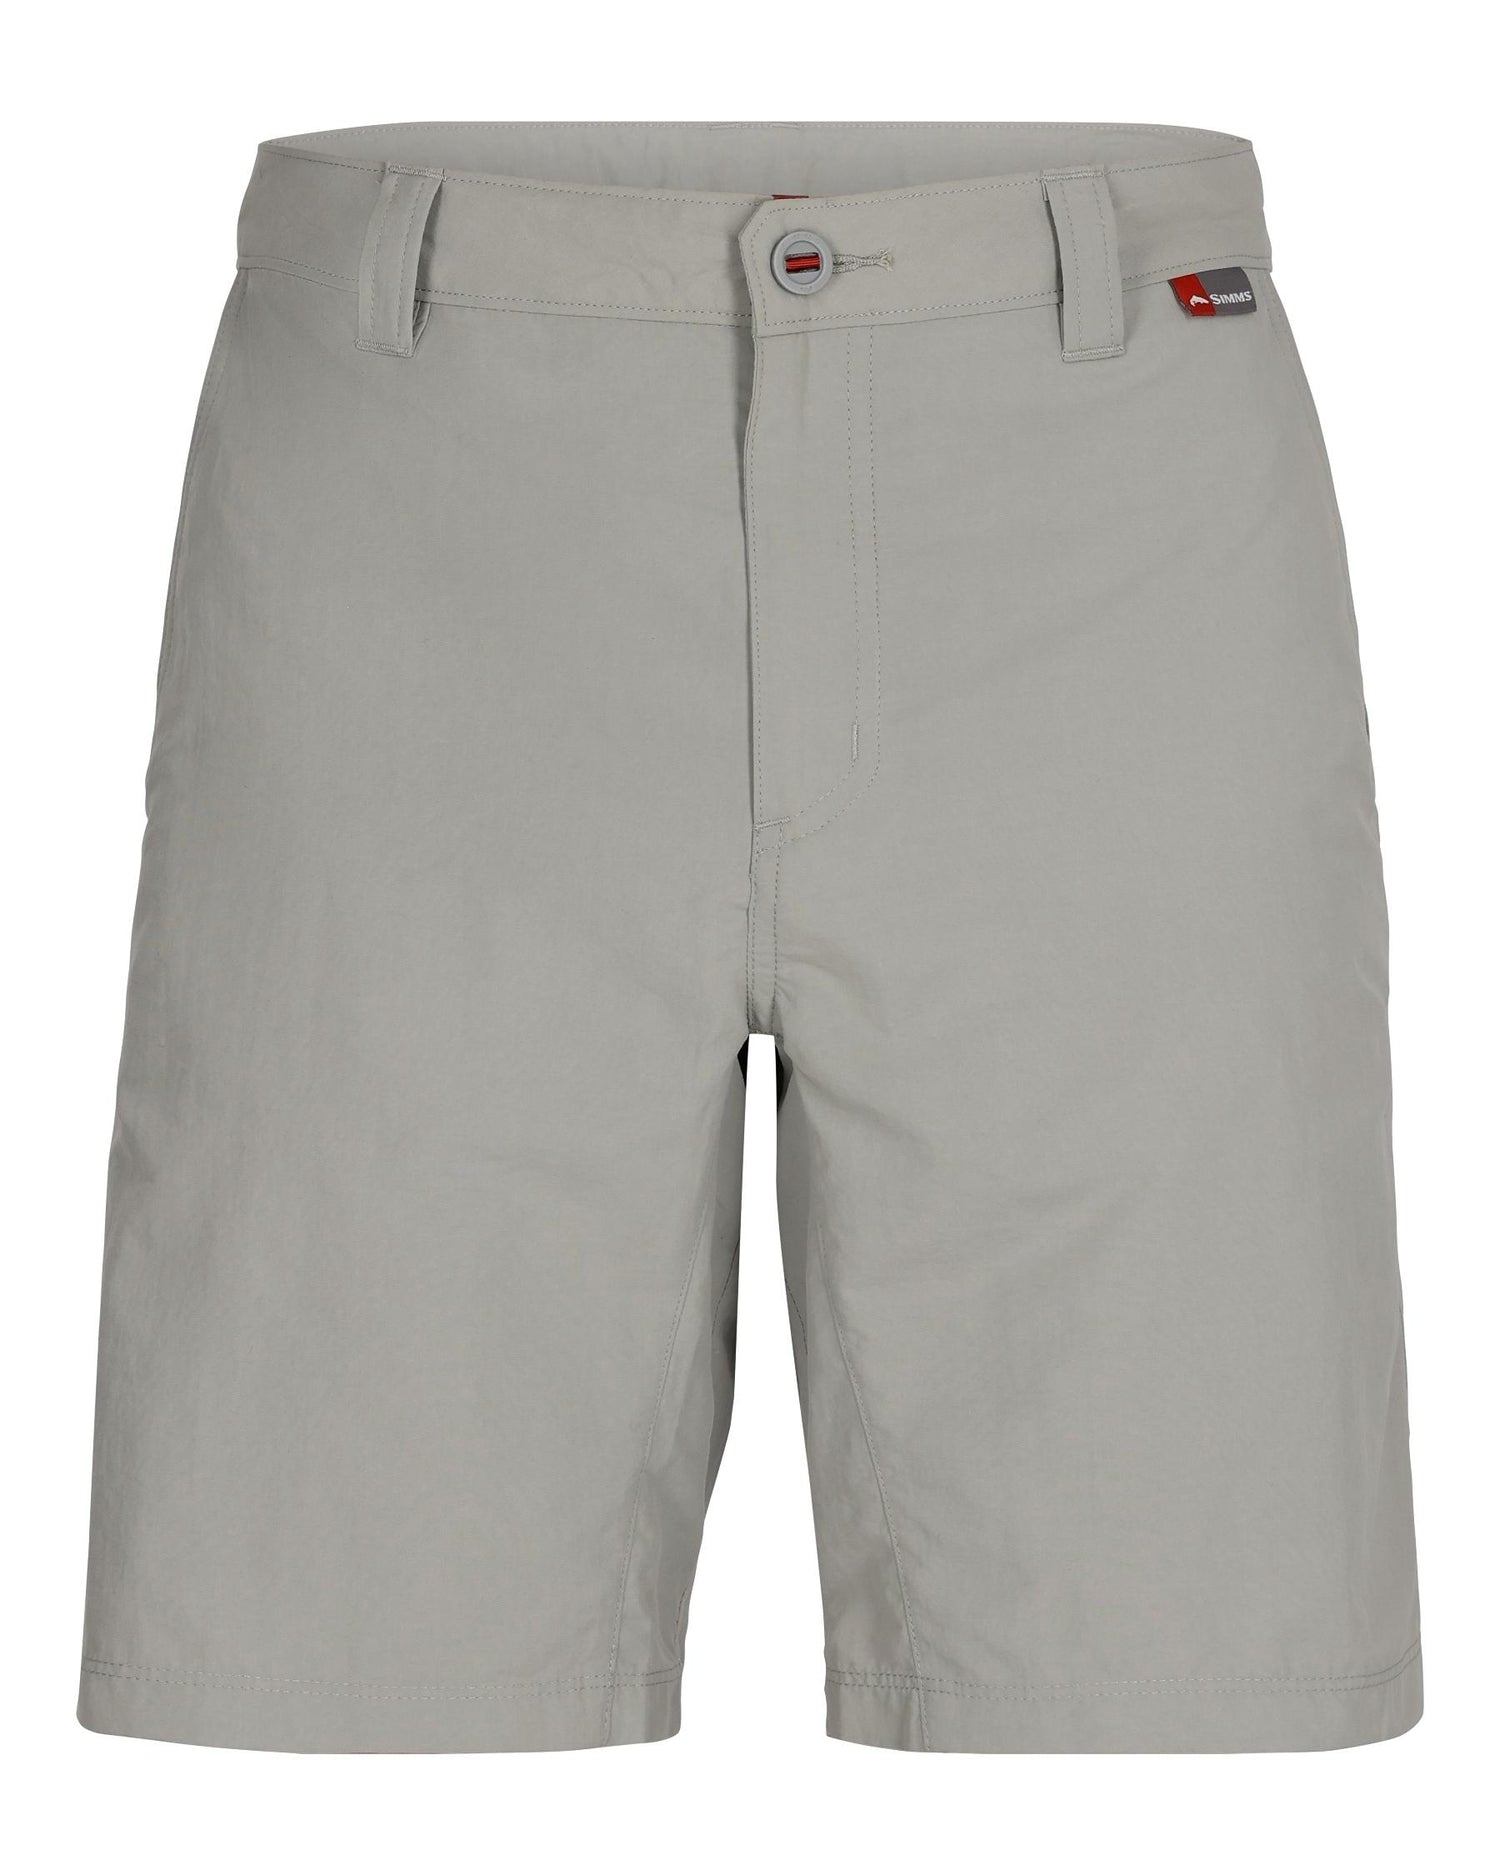 M's Superlight Shorts  Simms Fishing Products